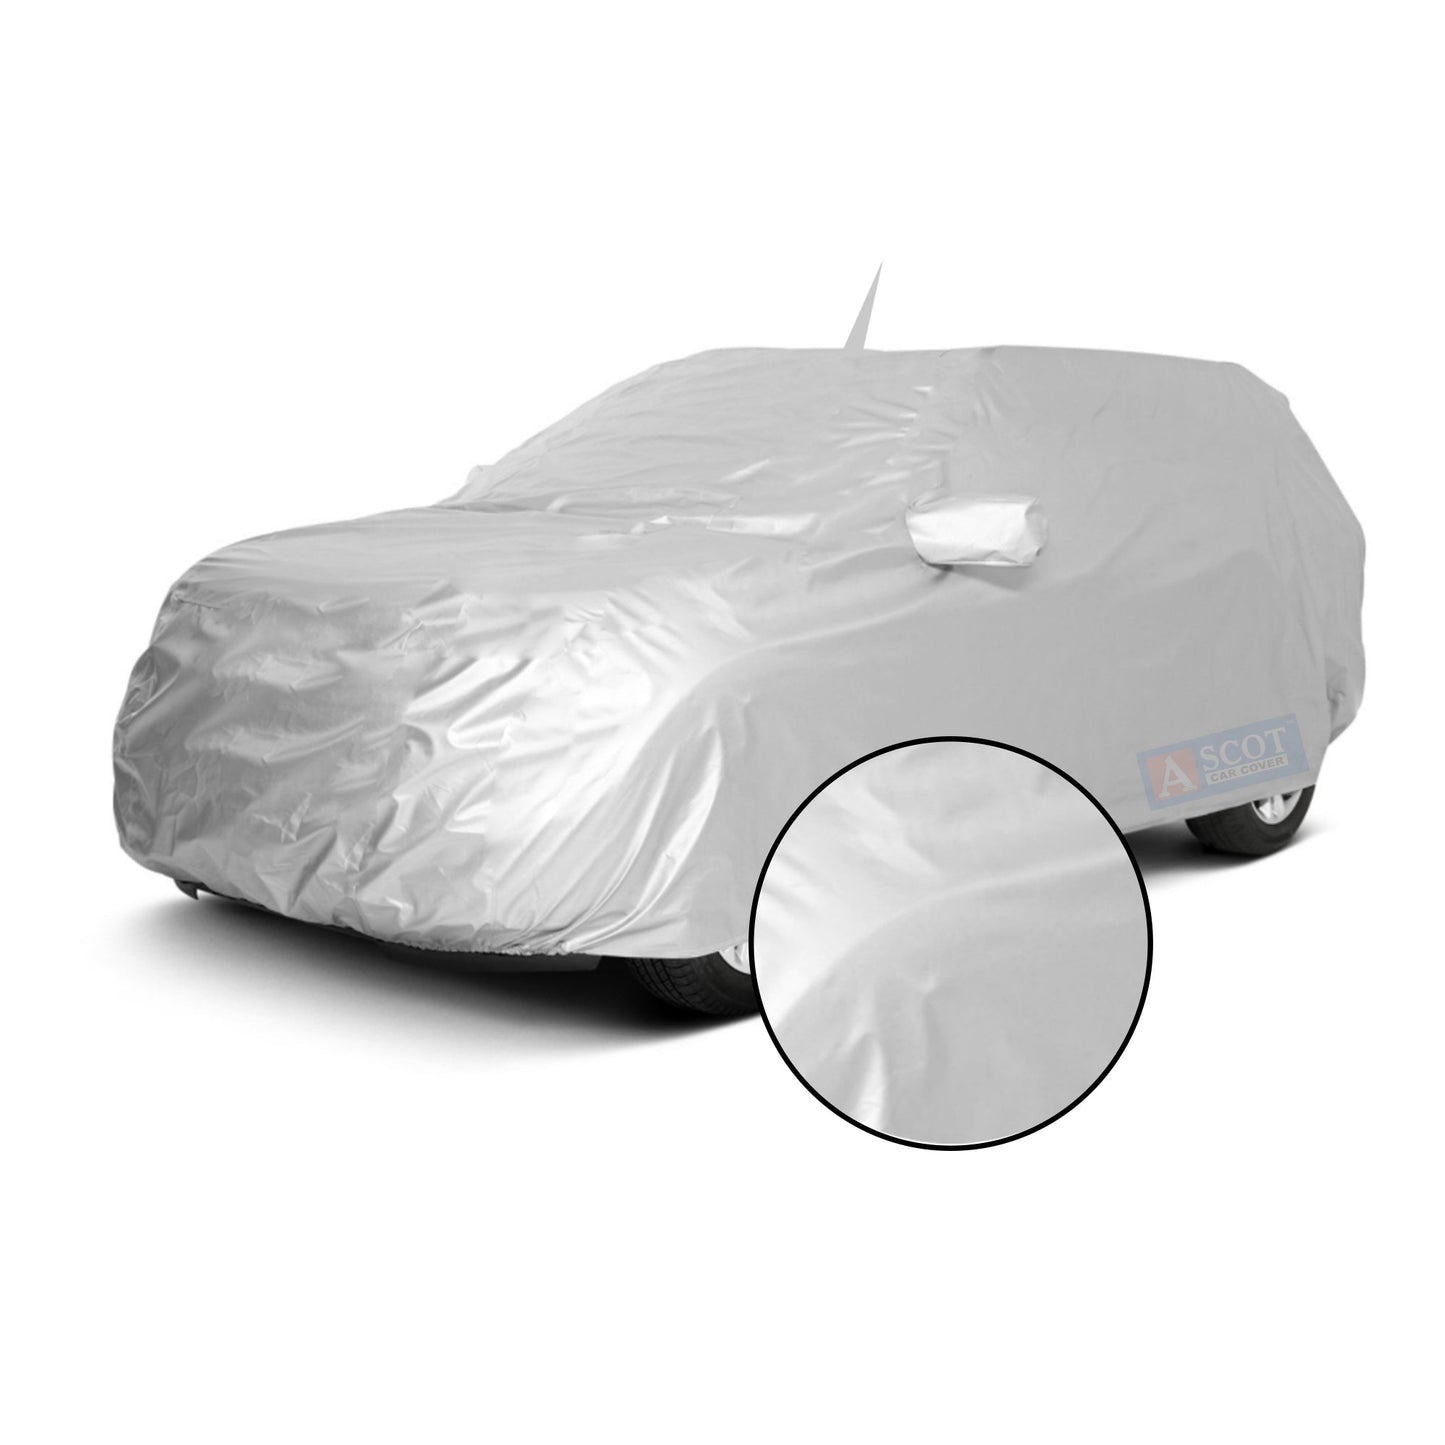 Ascot Volkswagen Polo Matt Edition Car Body Cover Dust Proof, Trippel Stitched